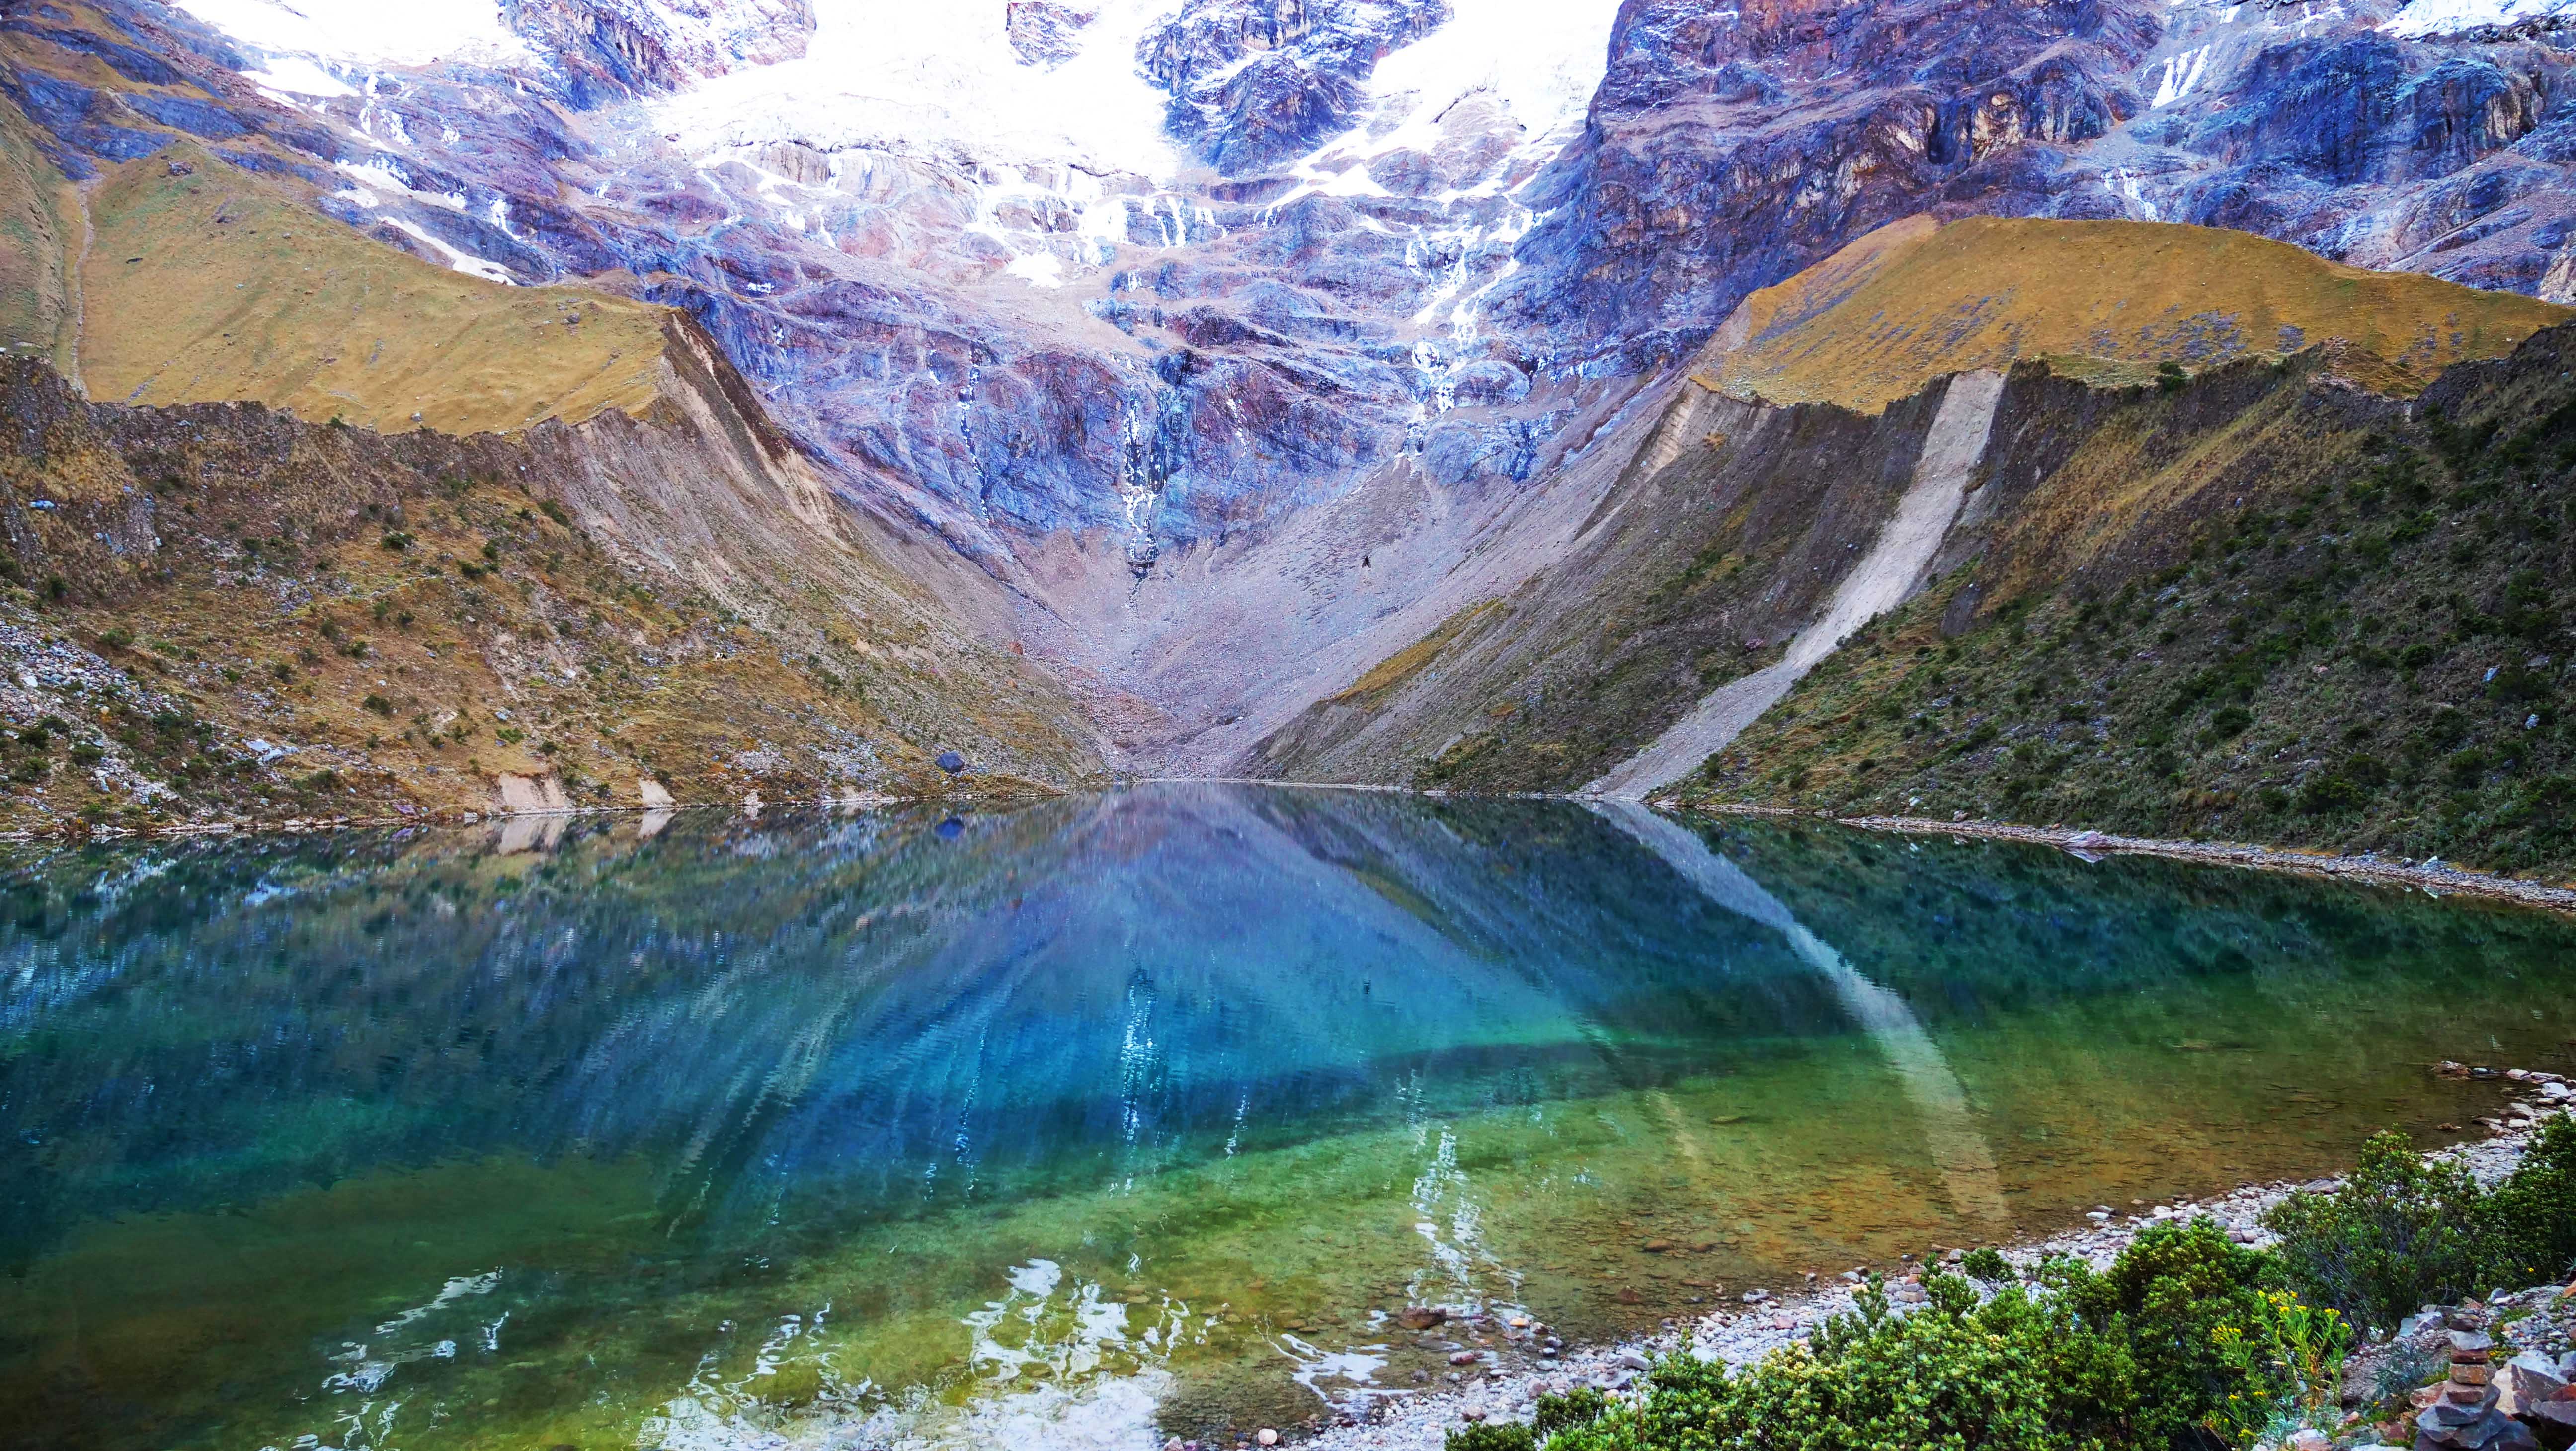 At sunset the lake's glassy surface reflects the colorful face of the glacier that feeds it.